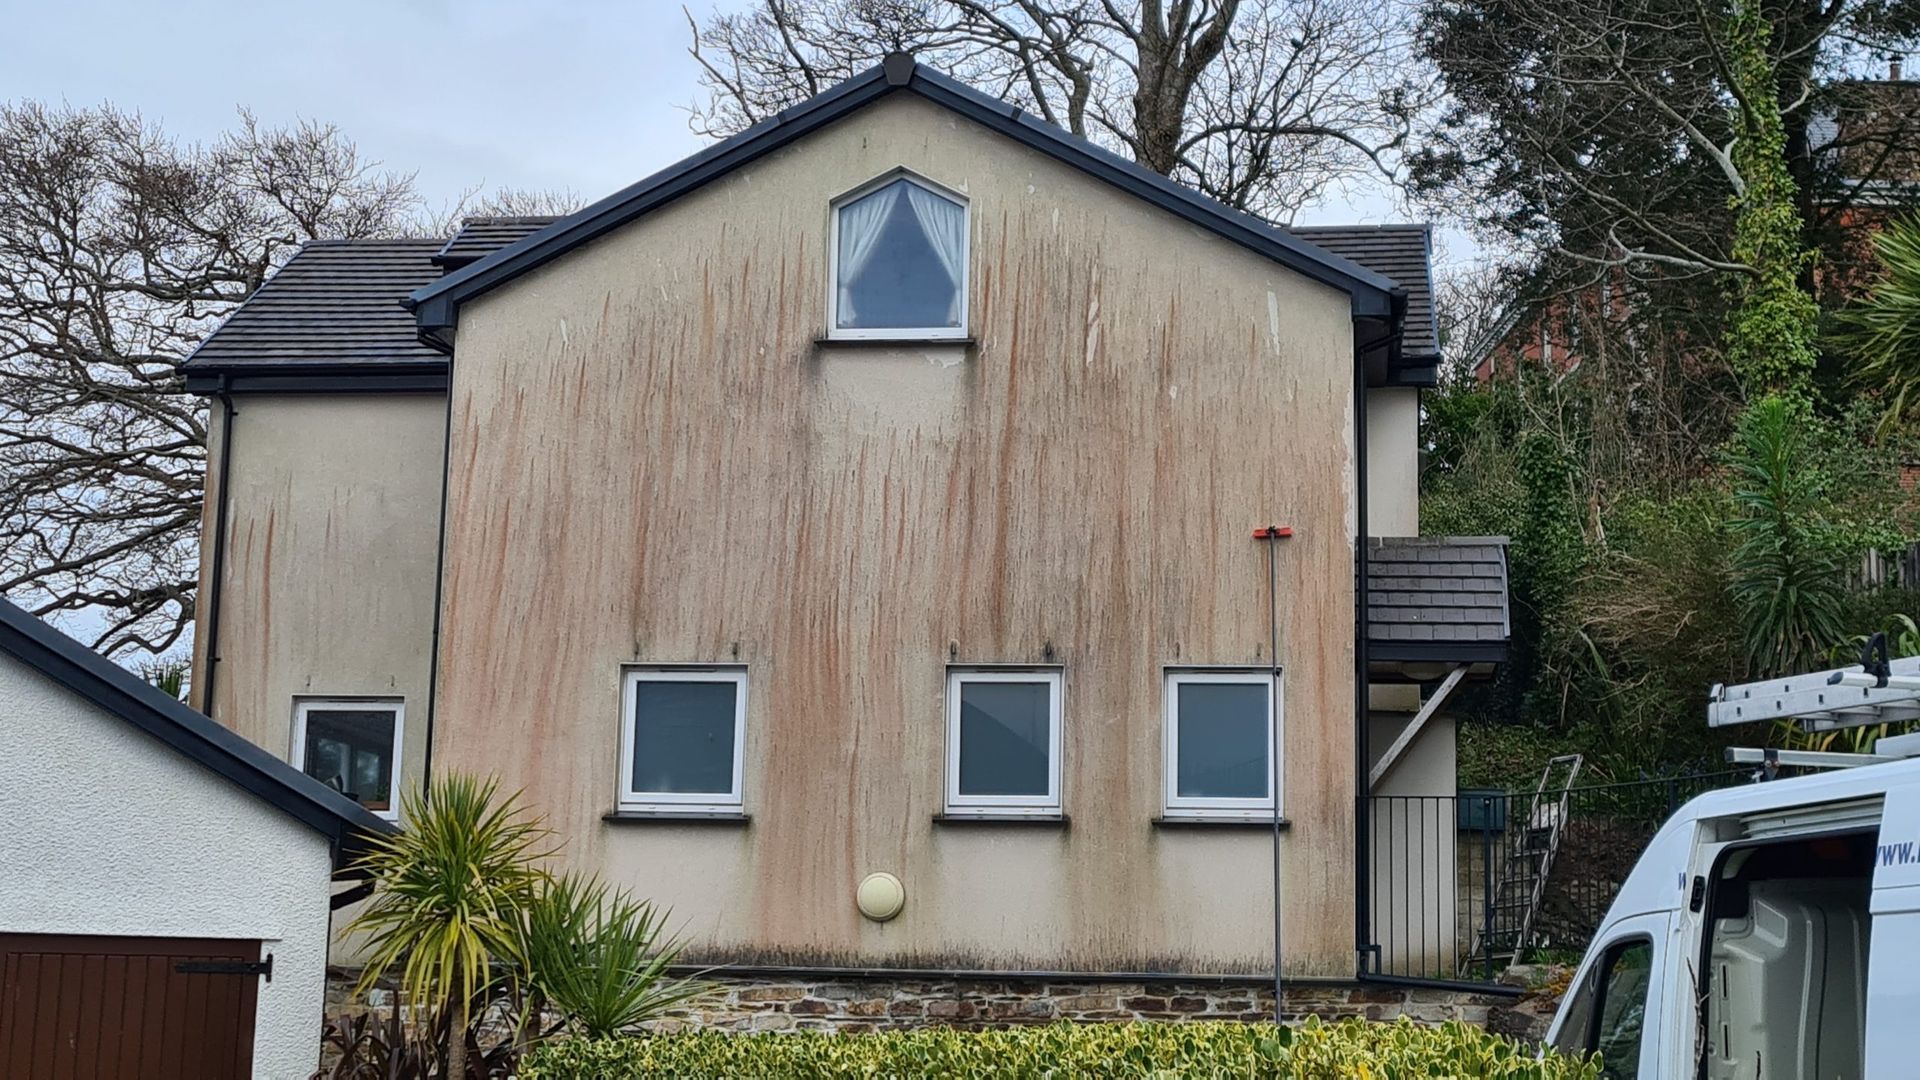 House requires render cleaning by soft washing methods